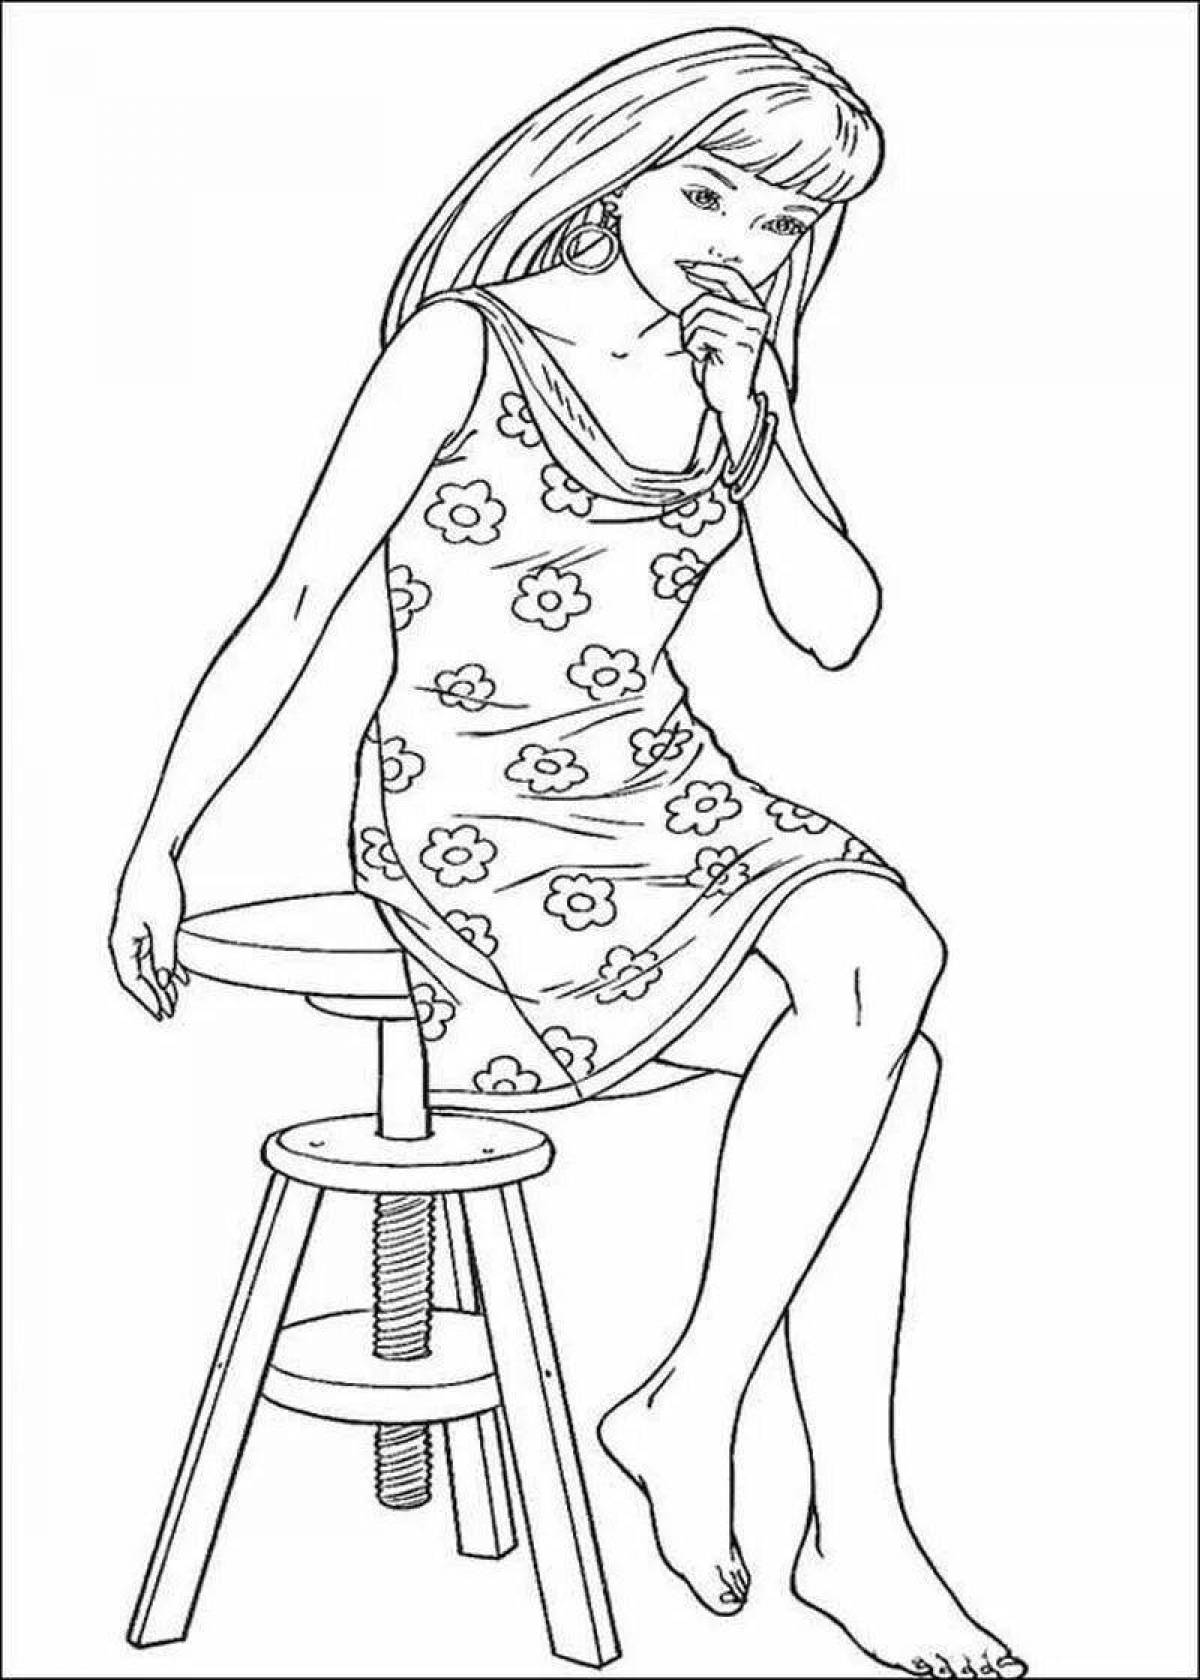 Nice man and girl coloring pages